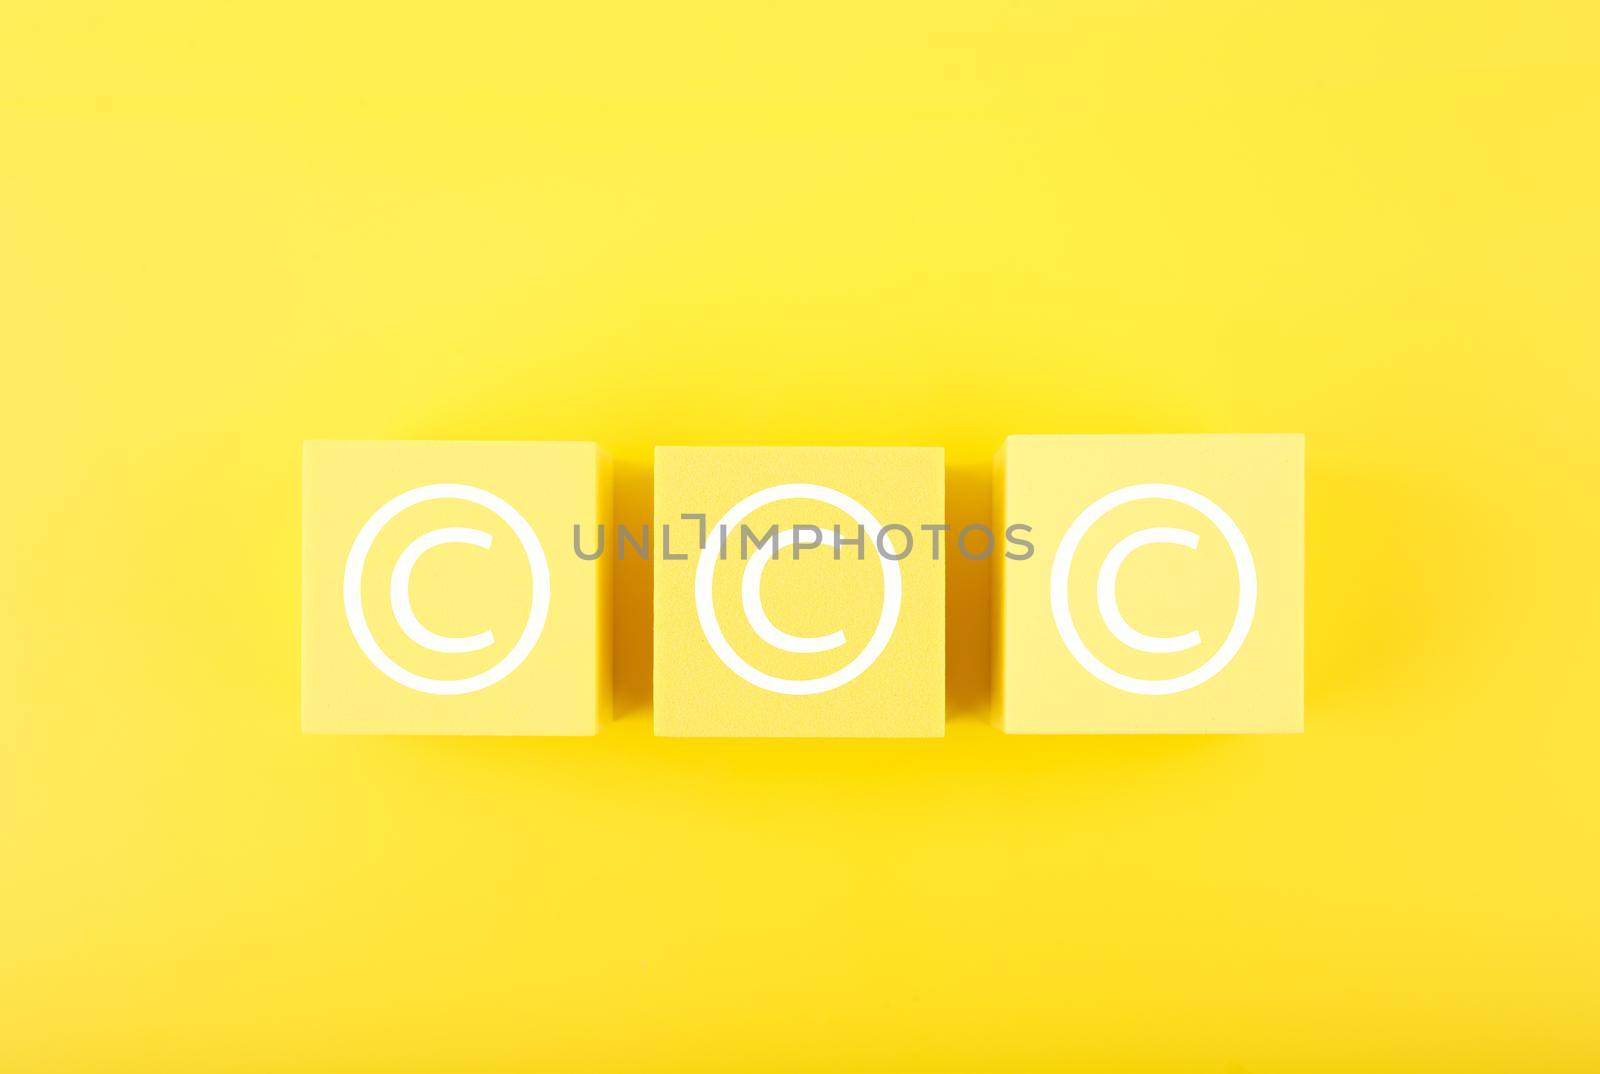 Copyright and intellectual property protection concept on yellow background  by Senorina_Irina